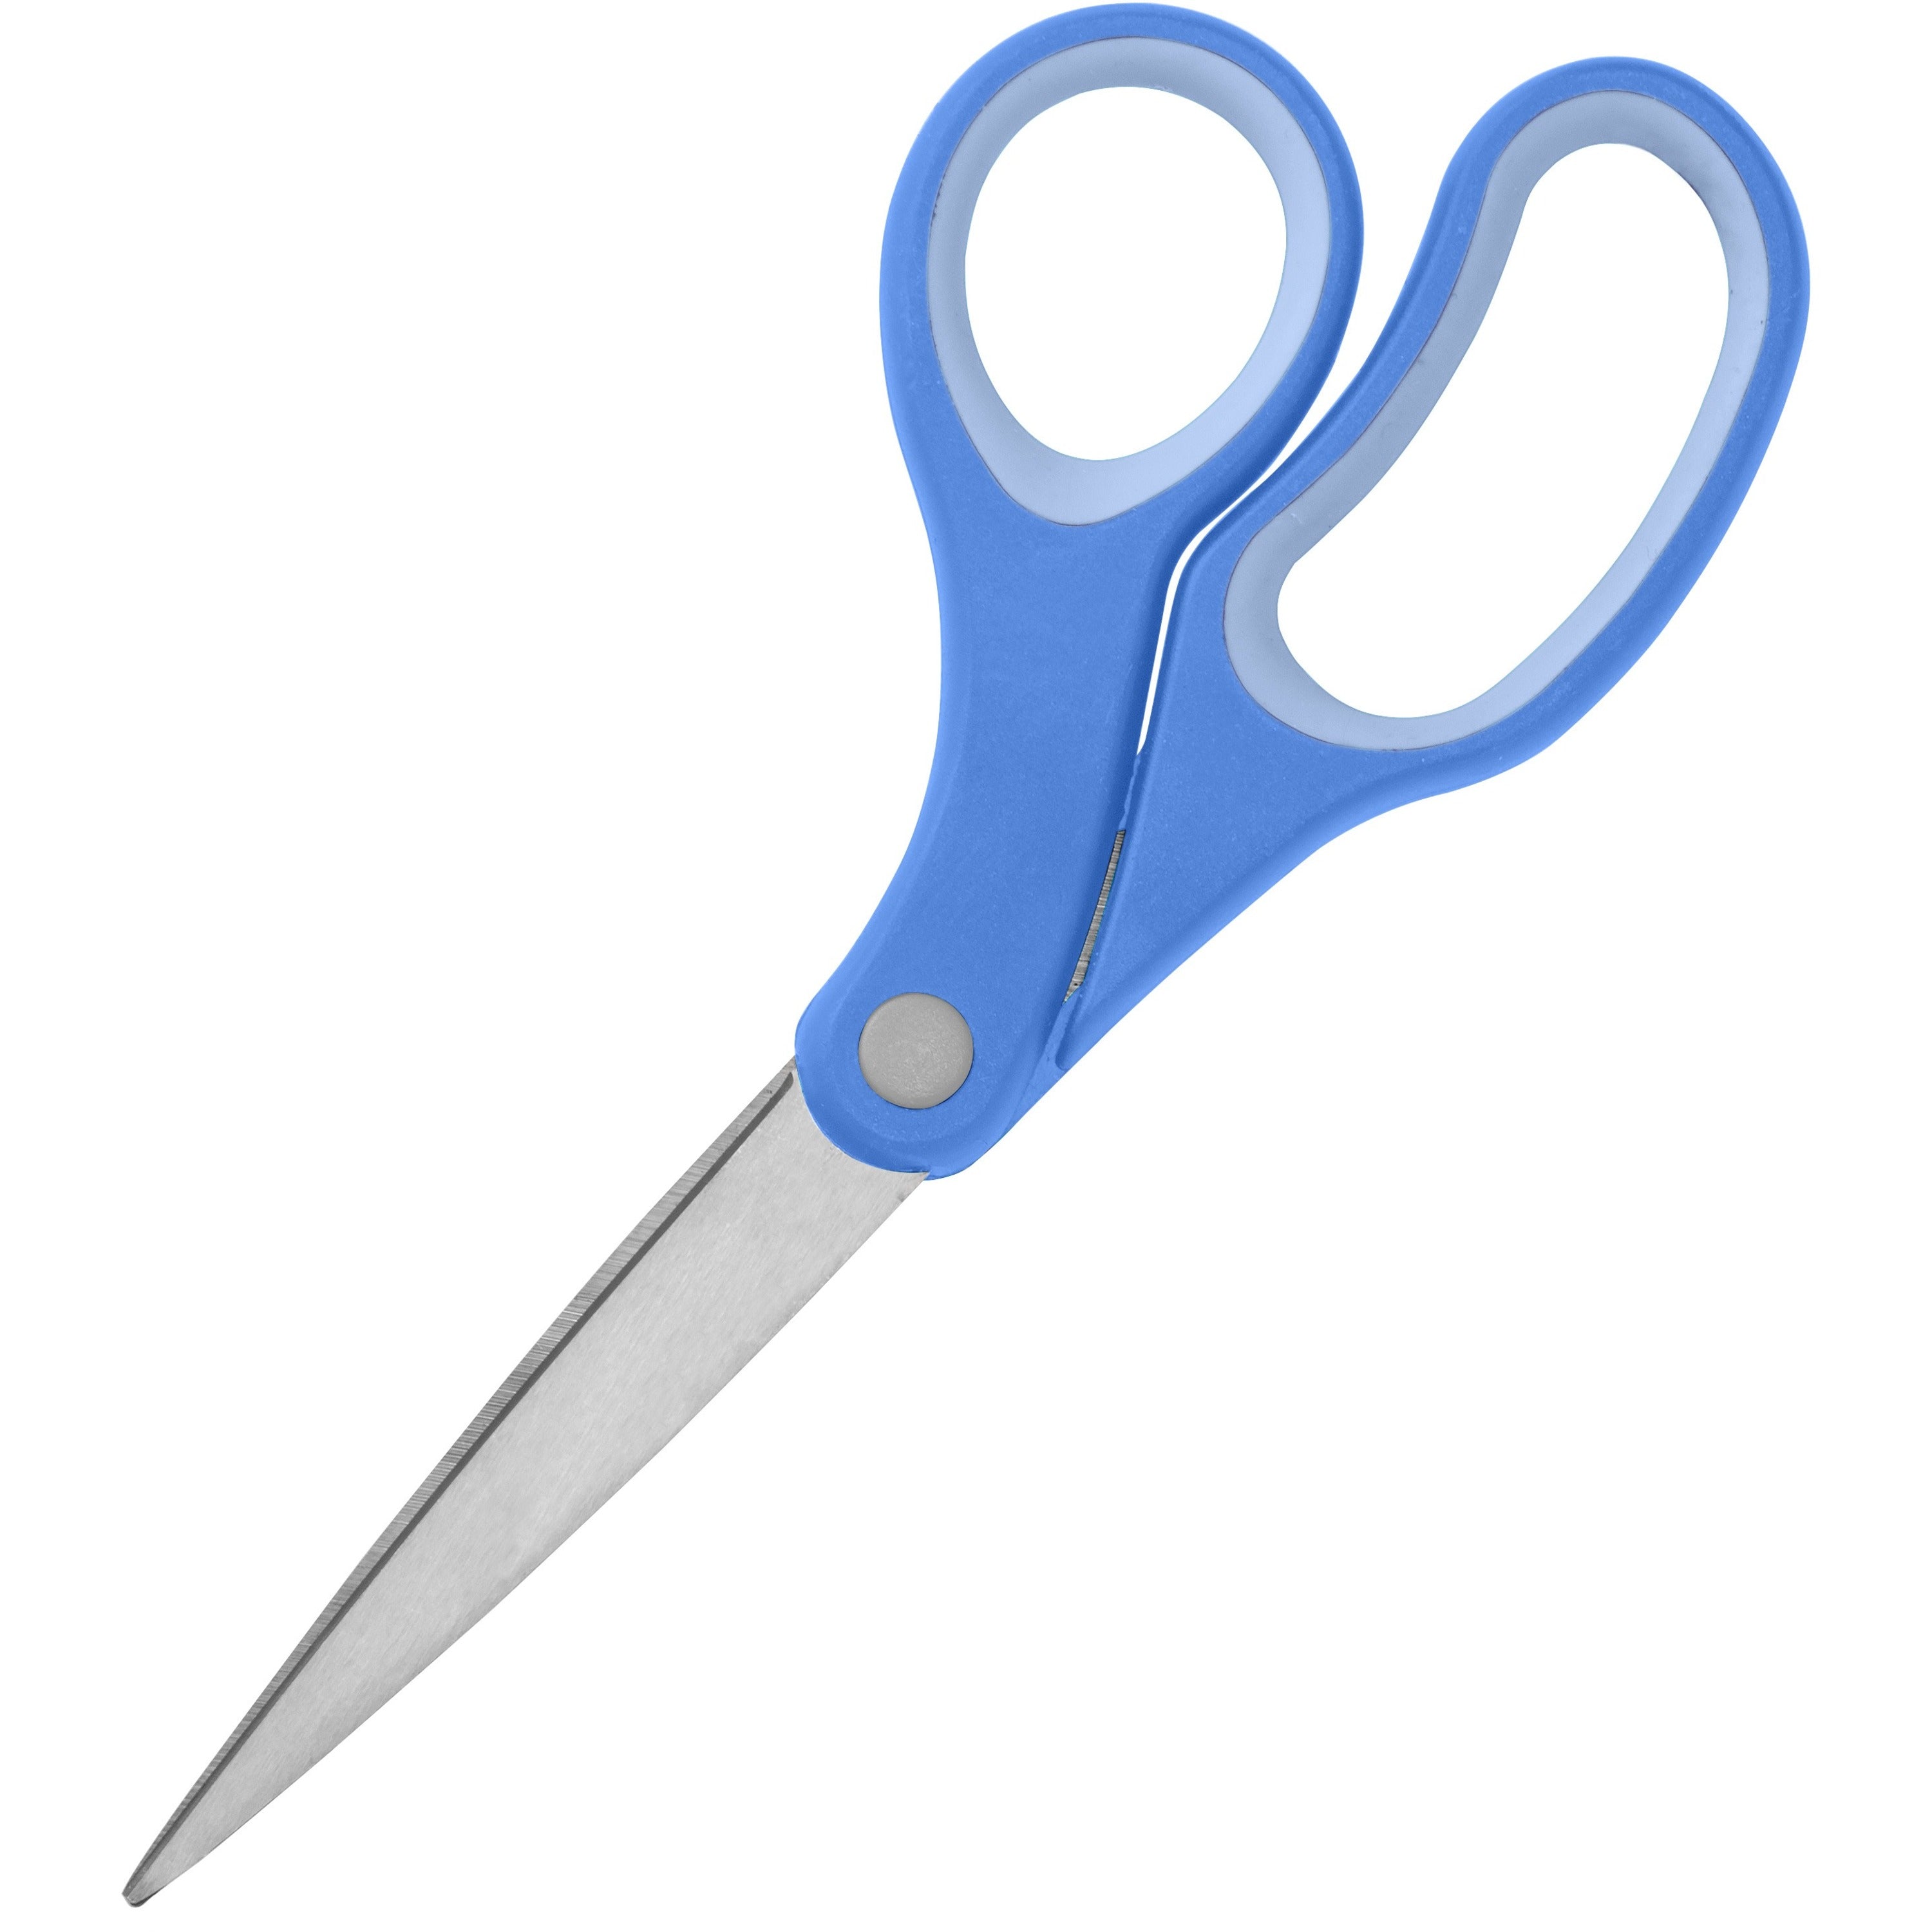 Sparco Bent Multipurpose Scissors - 8" Overall Length - Bent - Stainless Steel - Blue - 1 Each - 